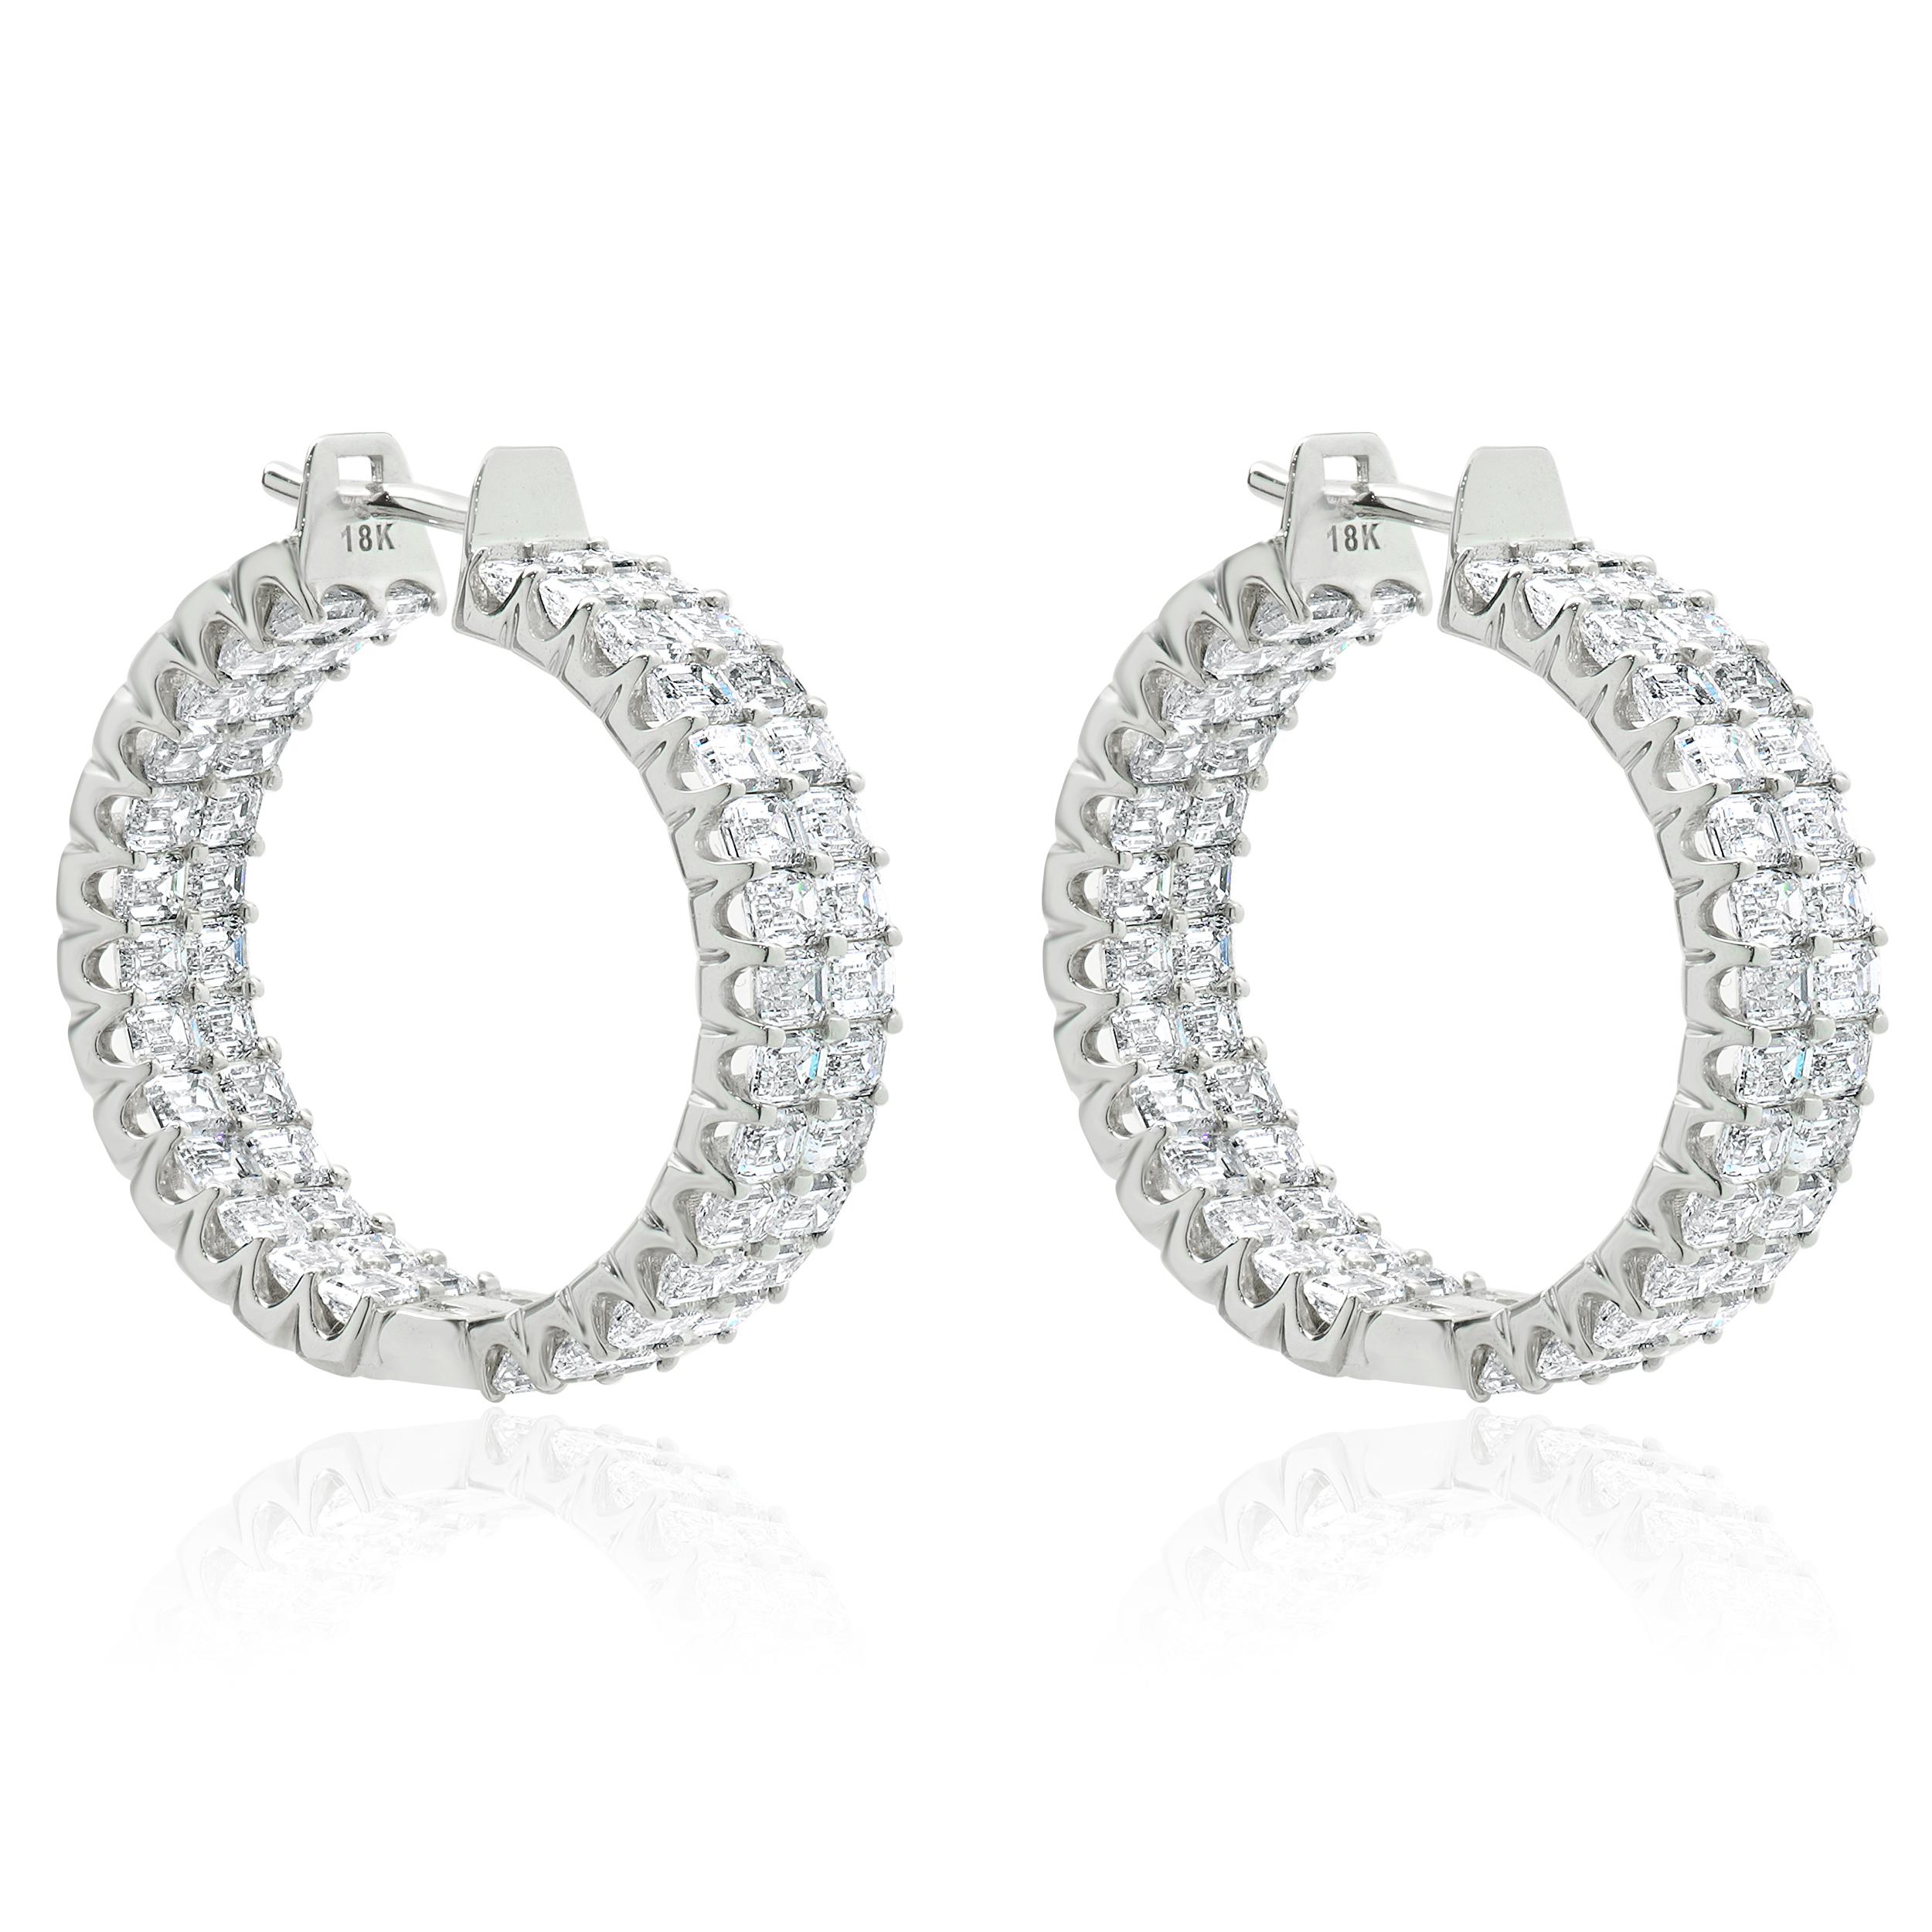 Designer: custom
Material: 18K White gold
Diamond: 112 emerald cut = 11.27cttw
Color: F/G
Clarity: VS1-2
Dimensions: earrings measure 1-inche in length
Weight: 16.82 grams